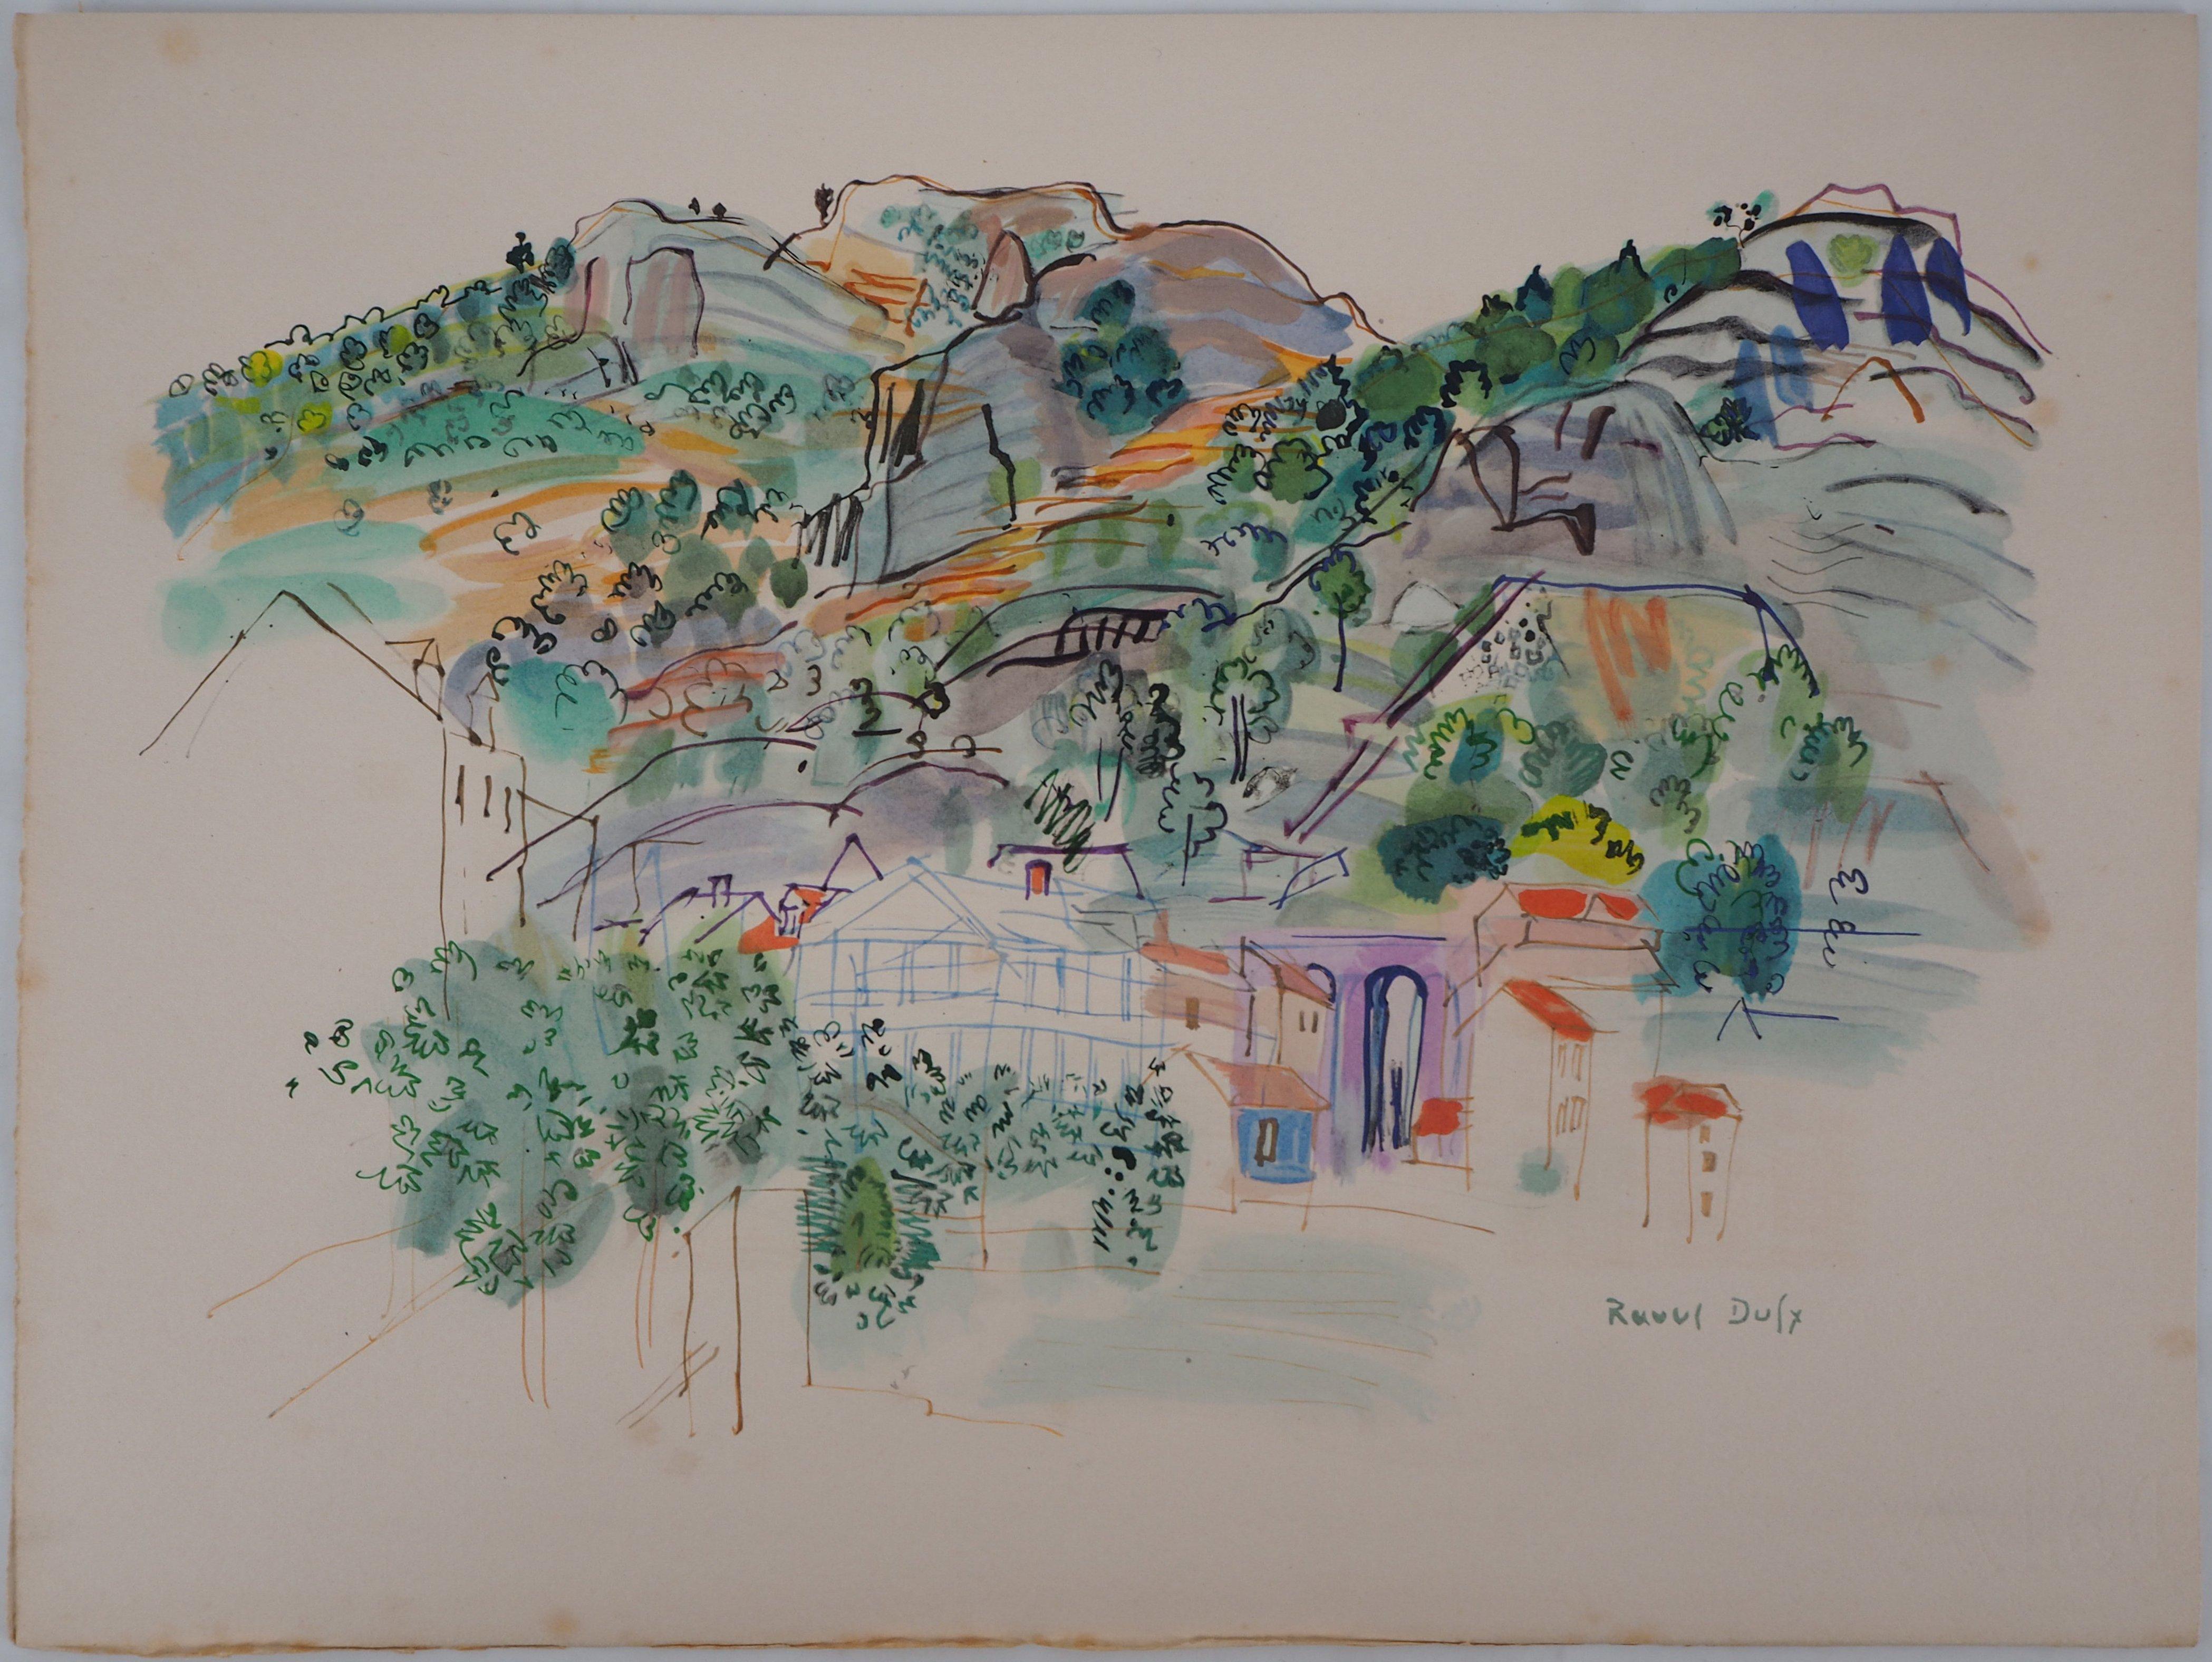 Provence : Village in the Mountain - Original Lithograph - Print by Raoul Dufy